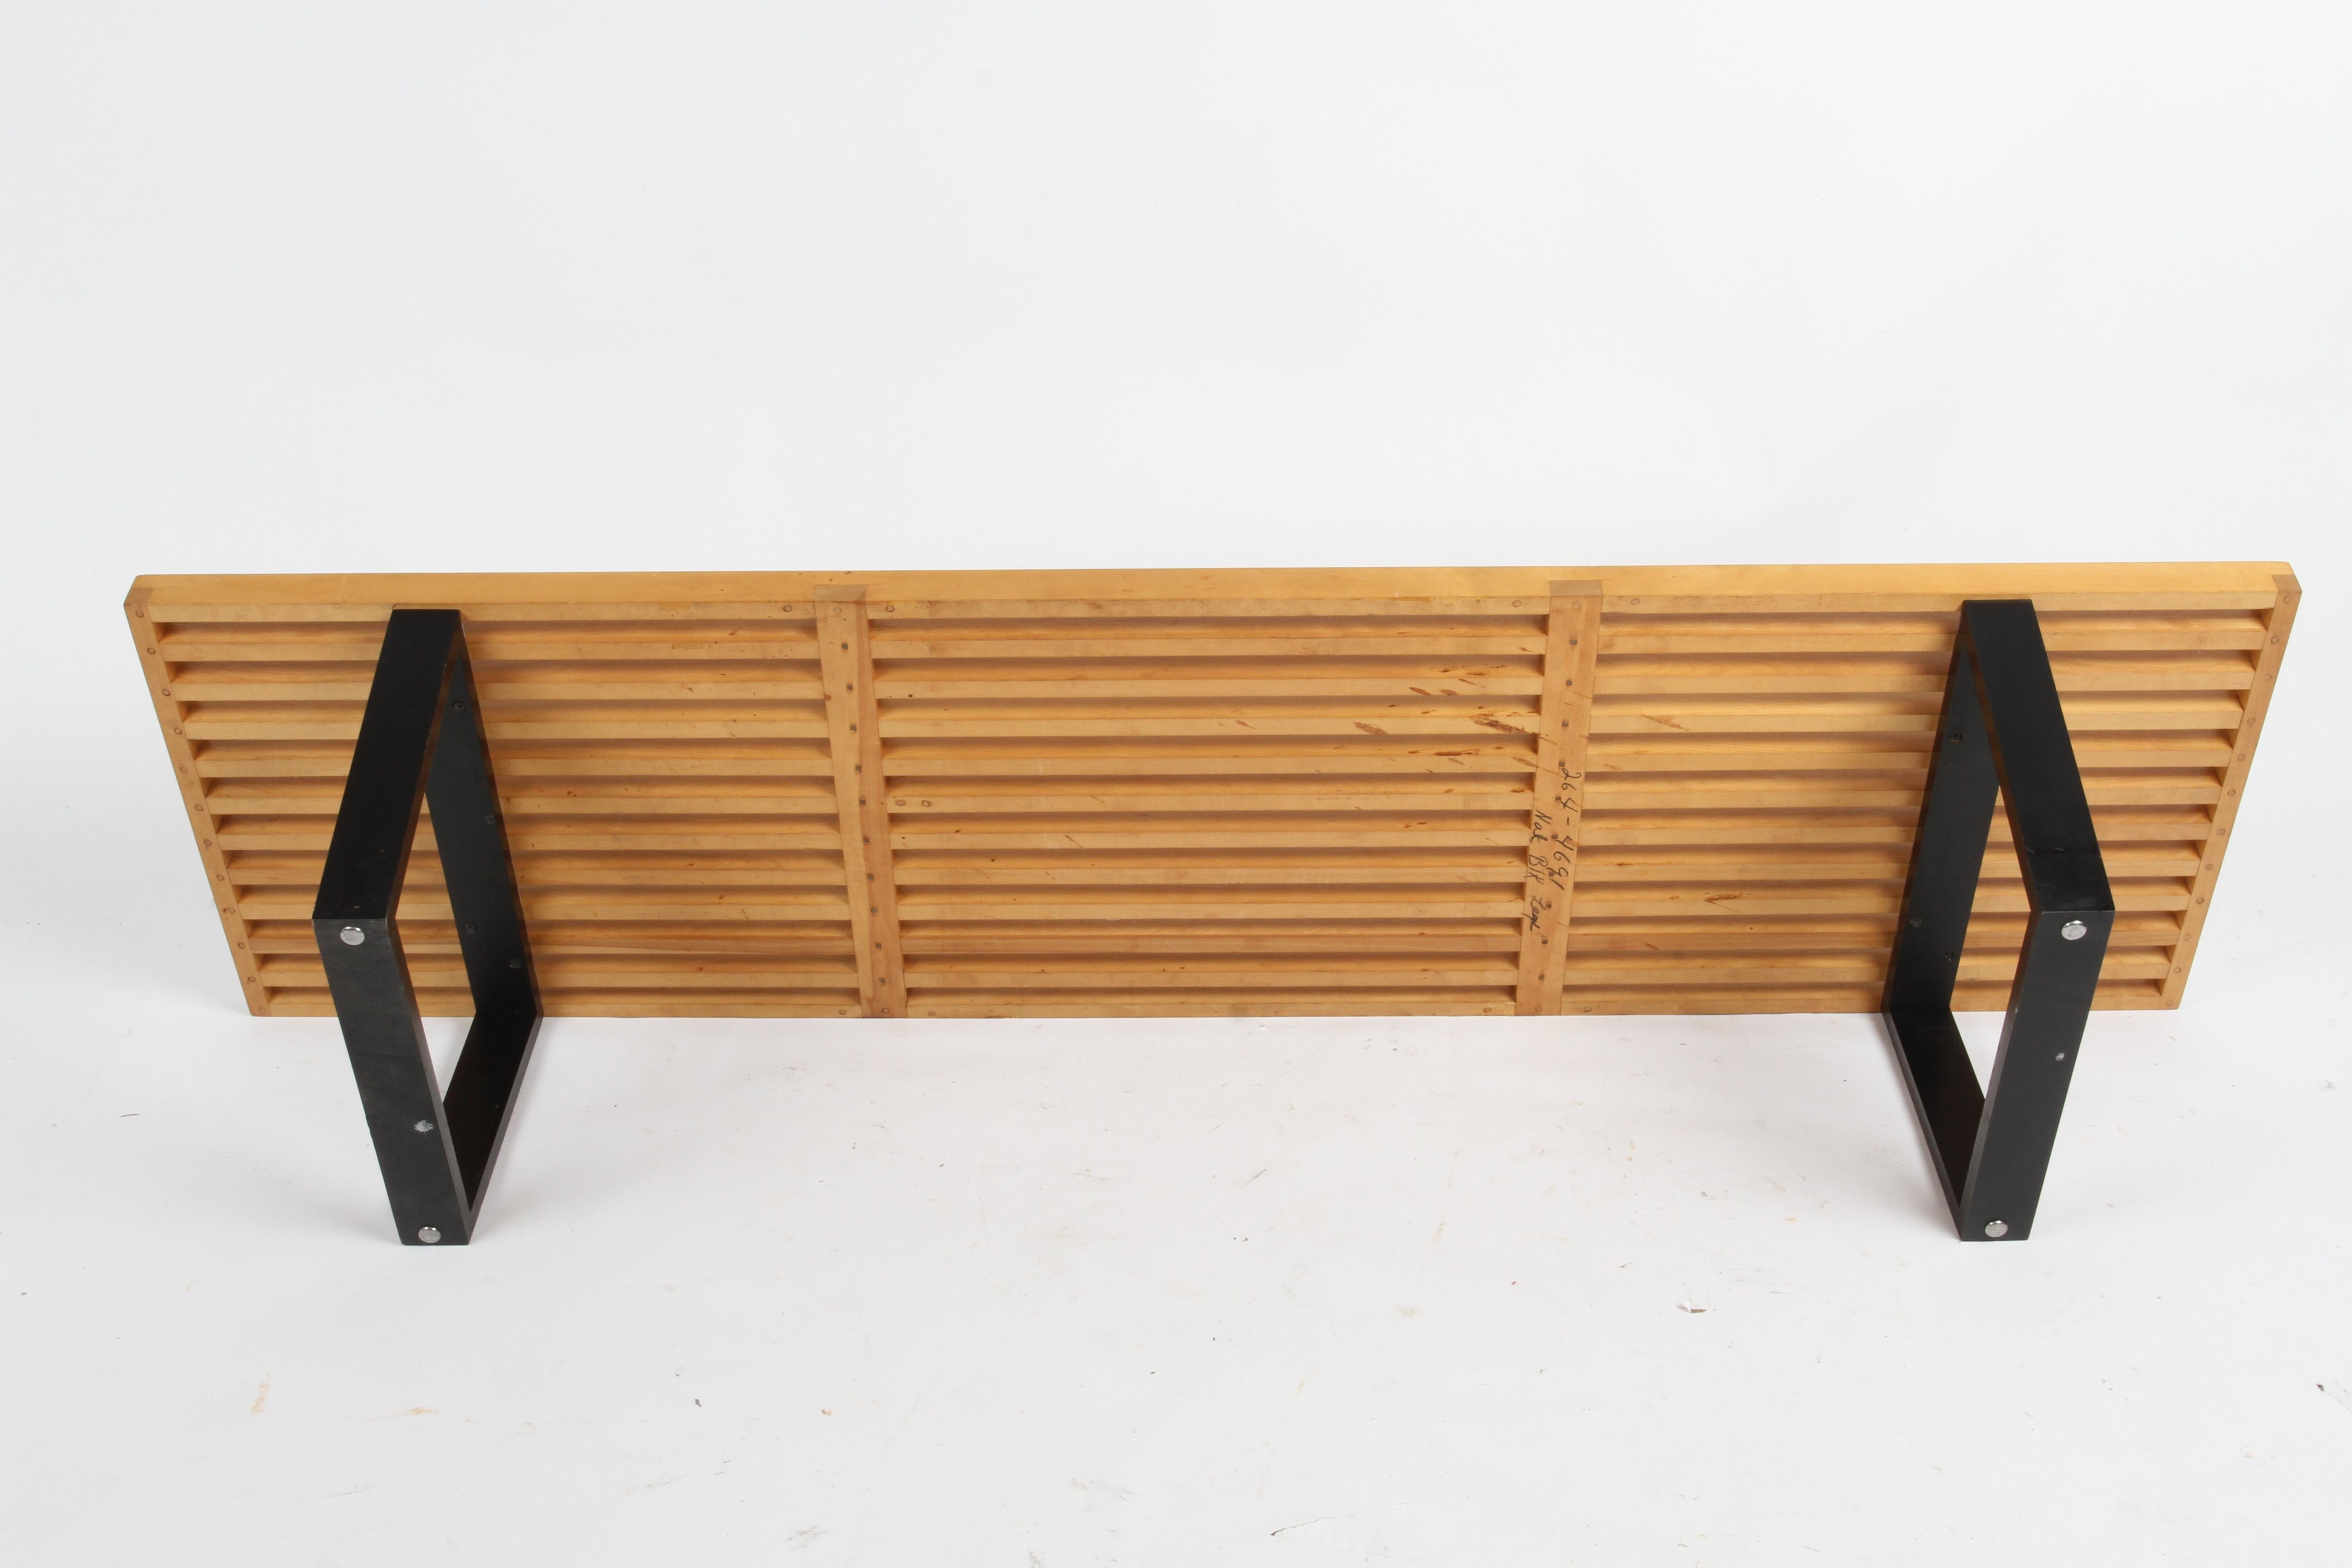 Iconic George Nelson #4691 Vintage Slat Bench for Herman Miller Uncommon 68